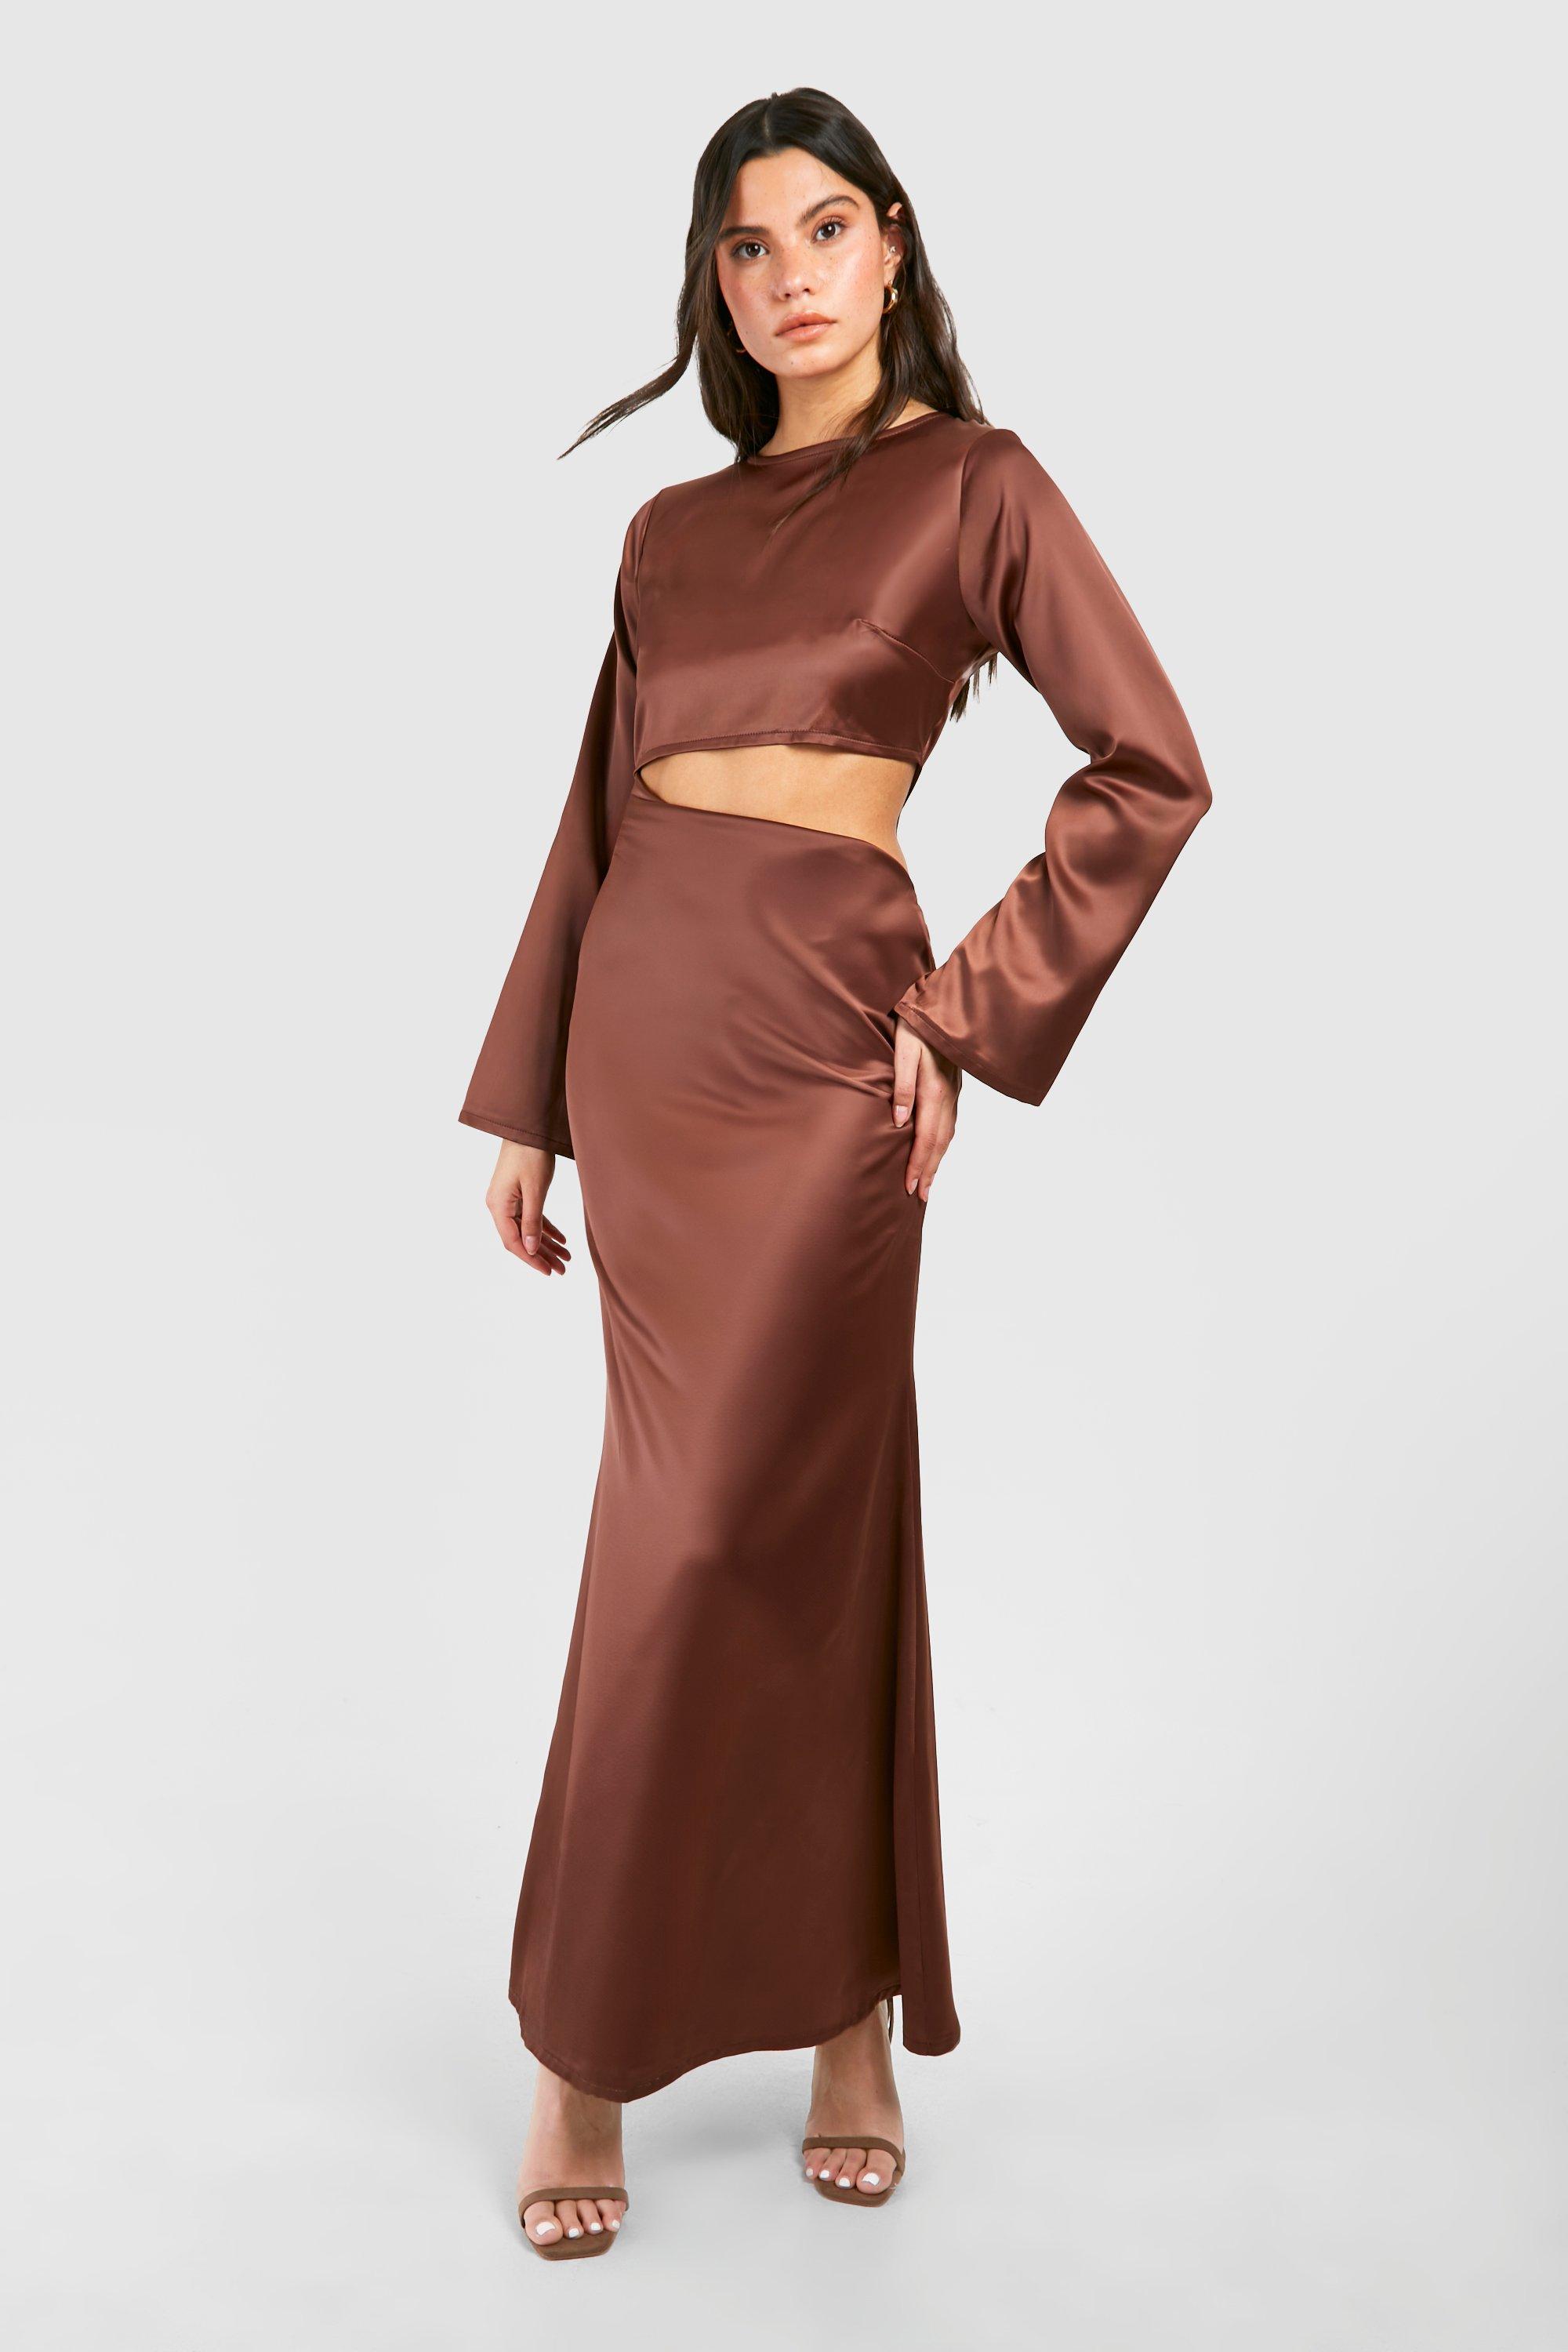 Image of Satin Cut Out Long Sleeve Maxi Dress, Brown